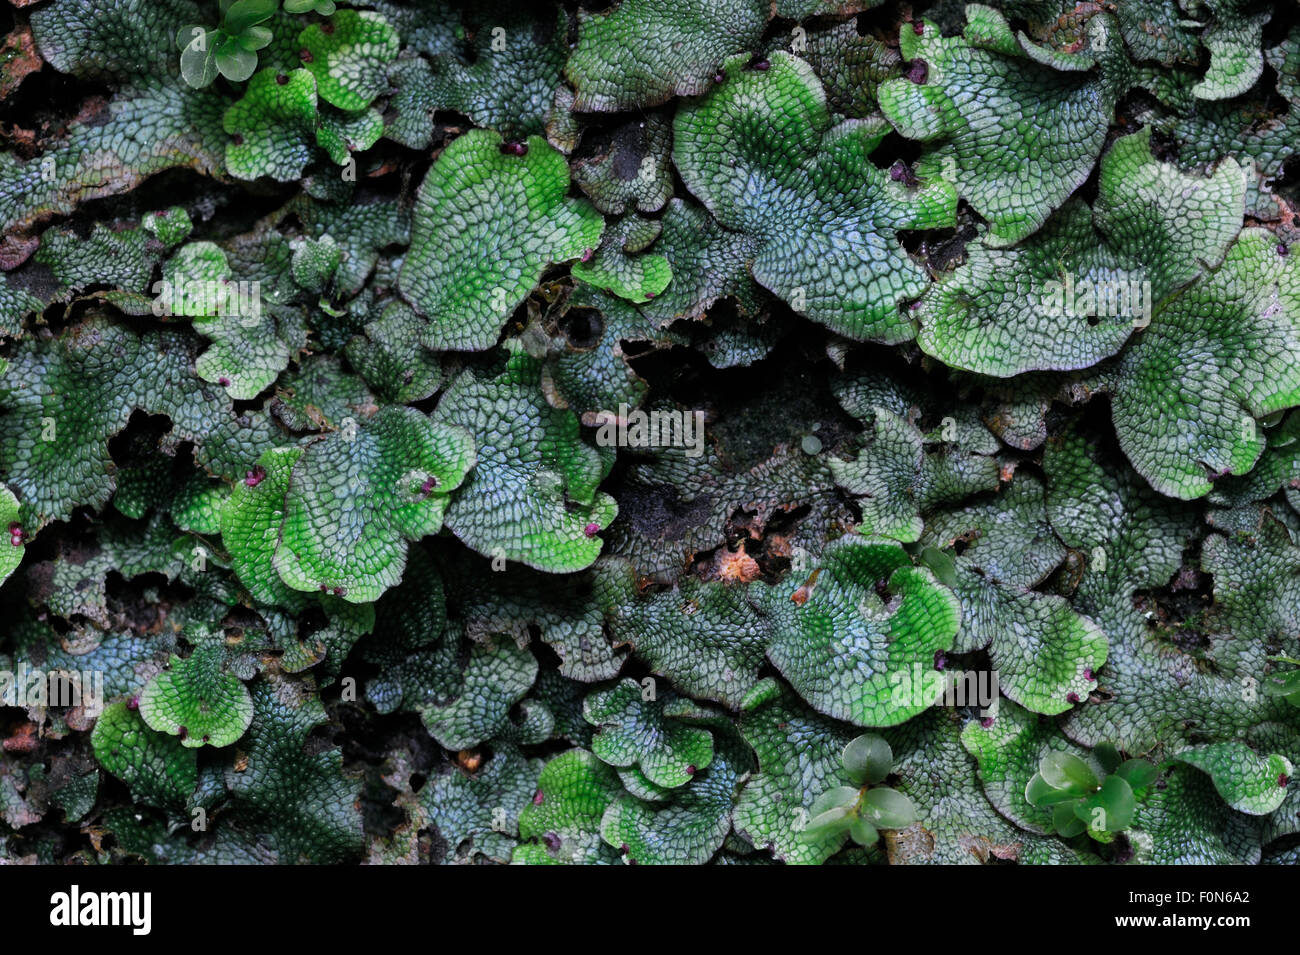 http://www.alamy.com/stock-photo-common-liverwort-jungermannia-polymorpha-and-dotted-thyme-moss-rhizomnium-86517818.html